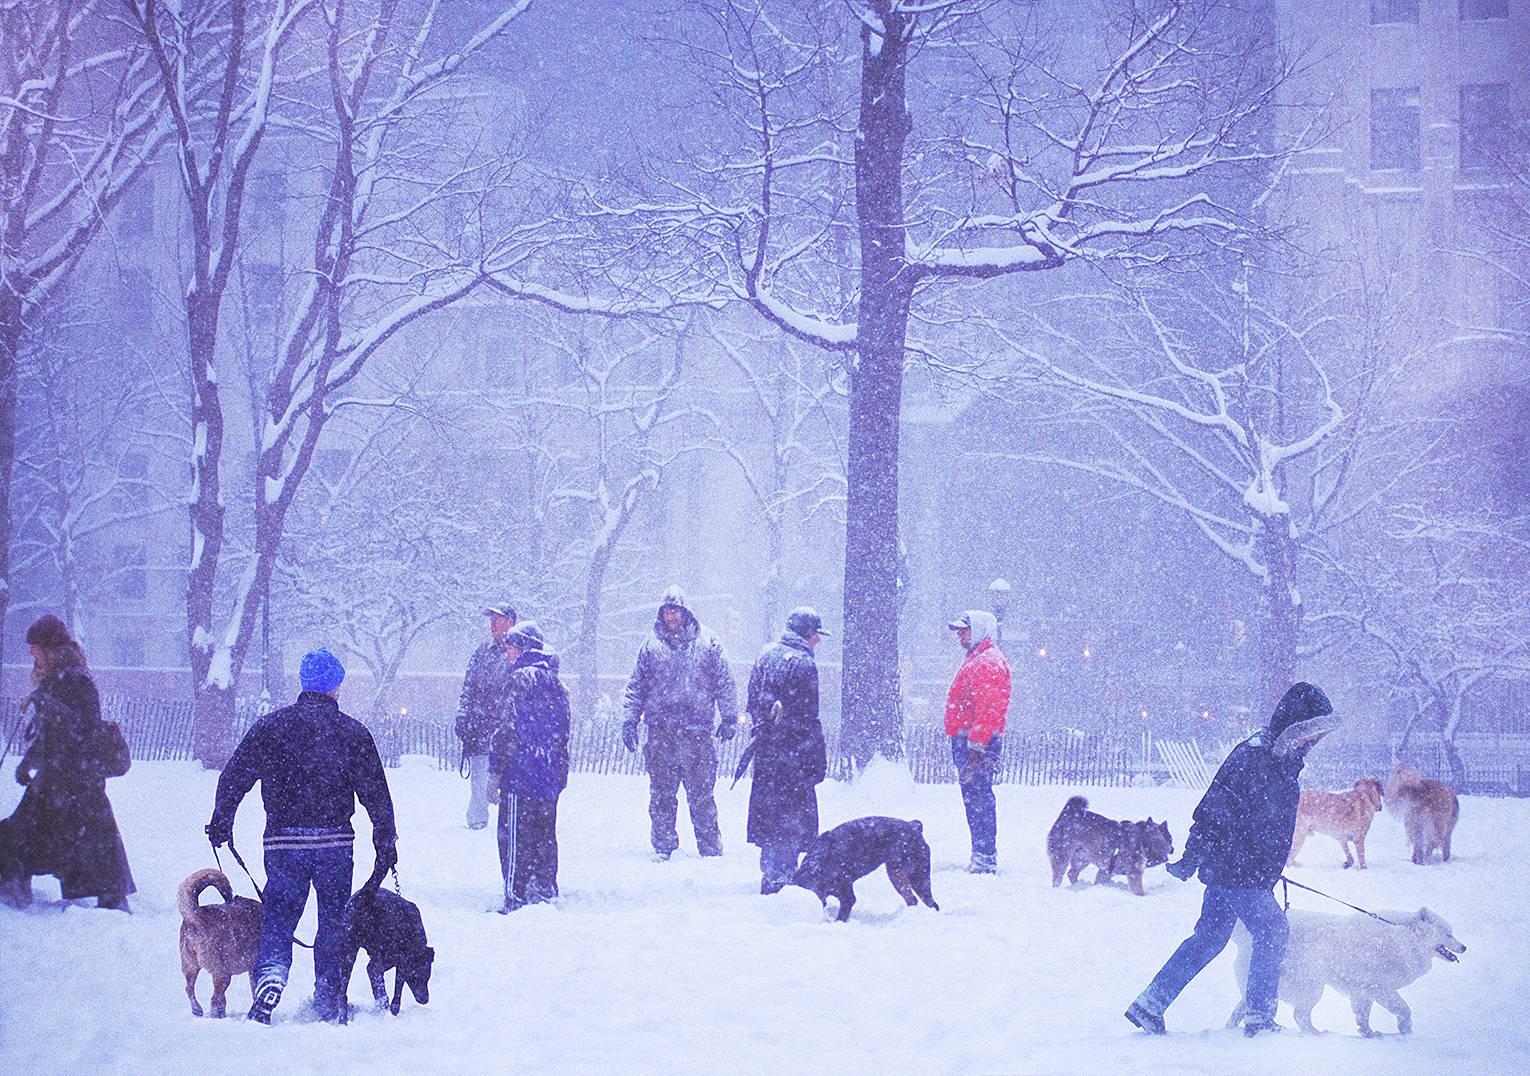 Dogs in Snow Storm, Madison Square, New York City 